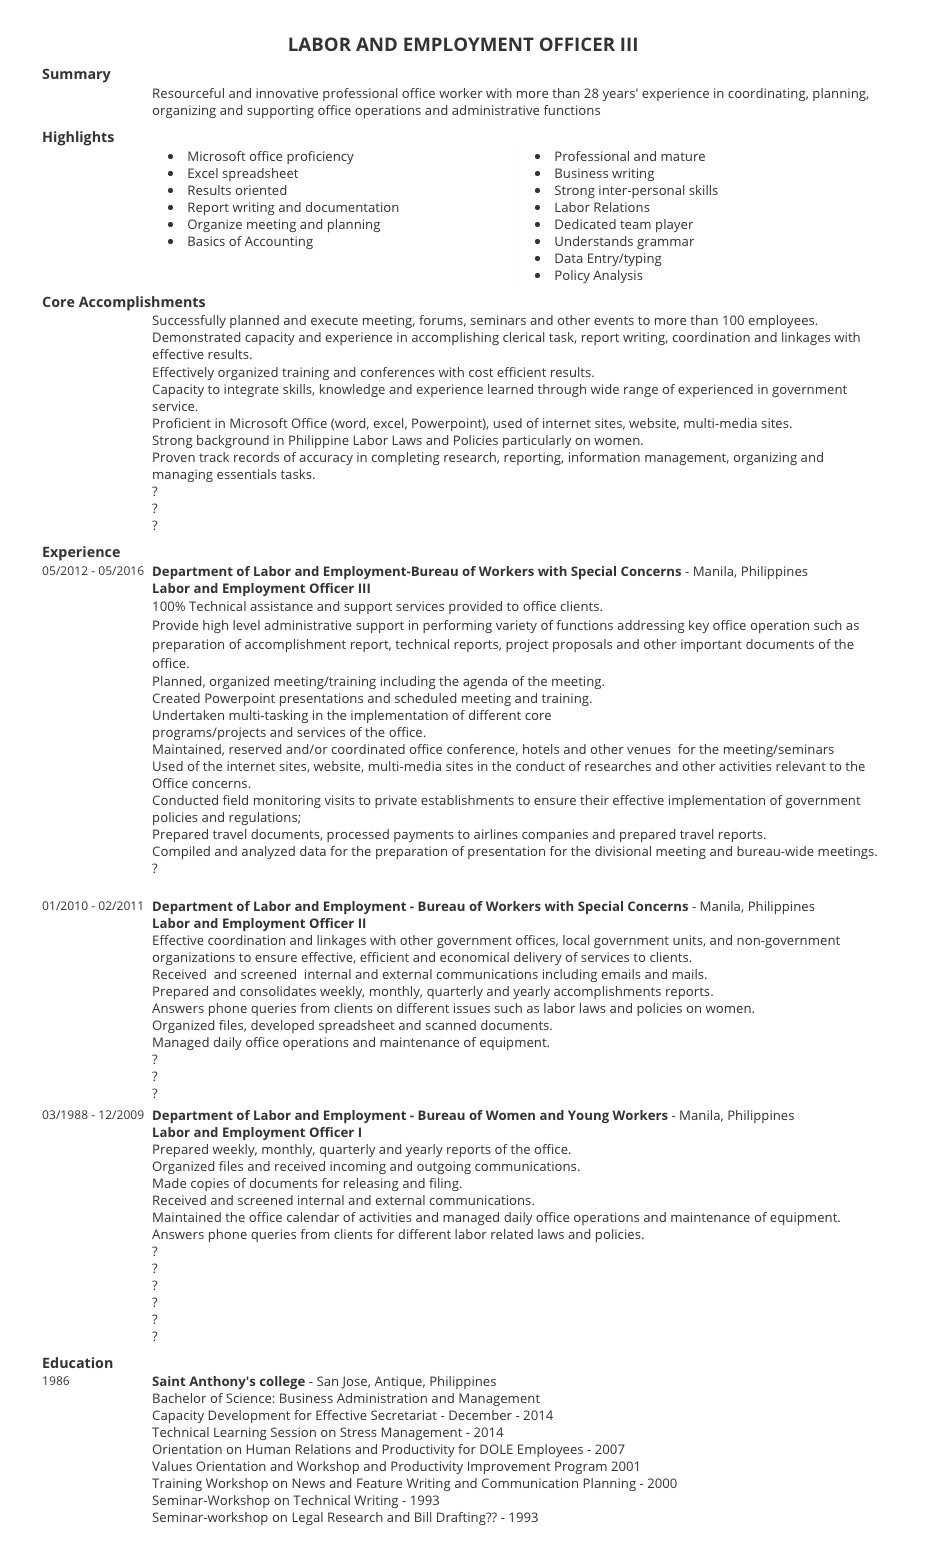 Sample Resume for Government Employee Philippines Resume Samples for Government Job Application In the Philippines